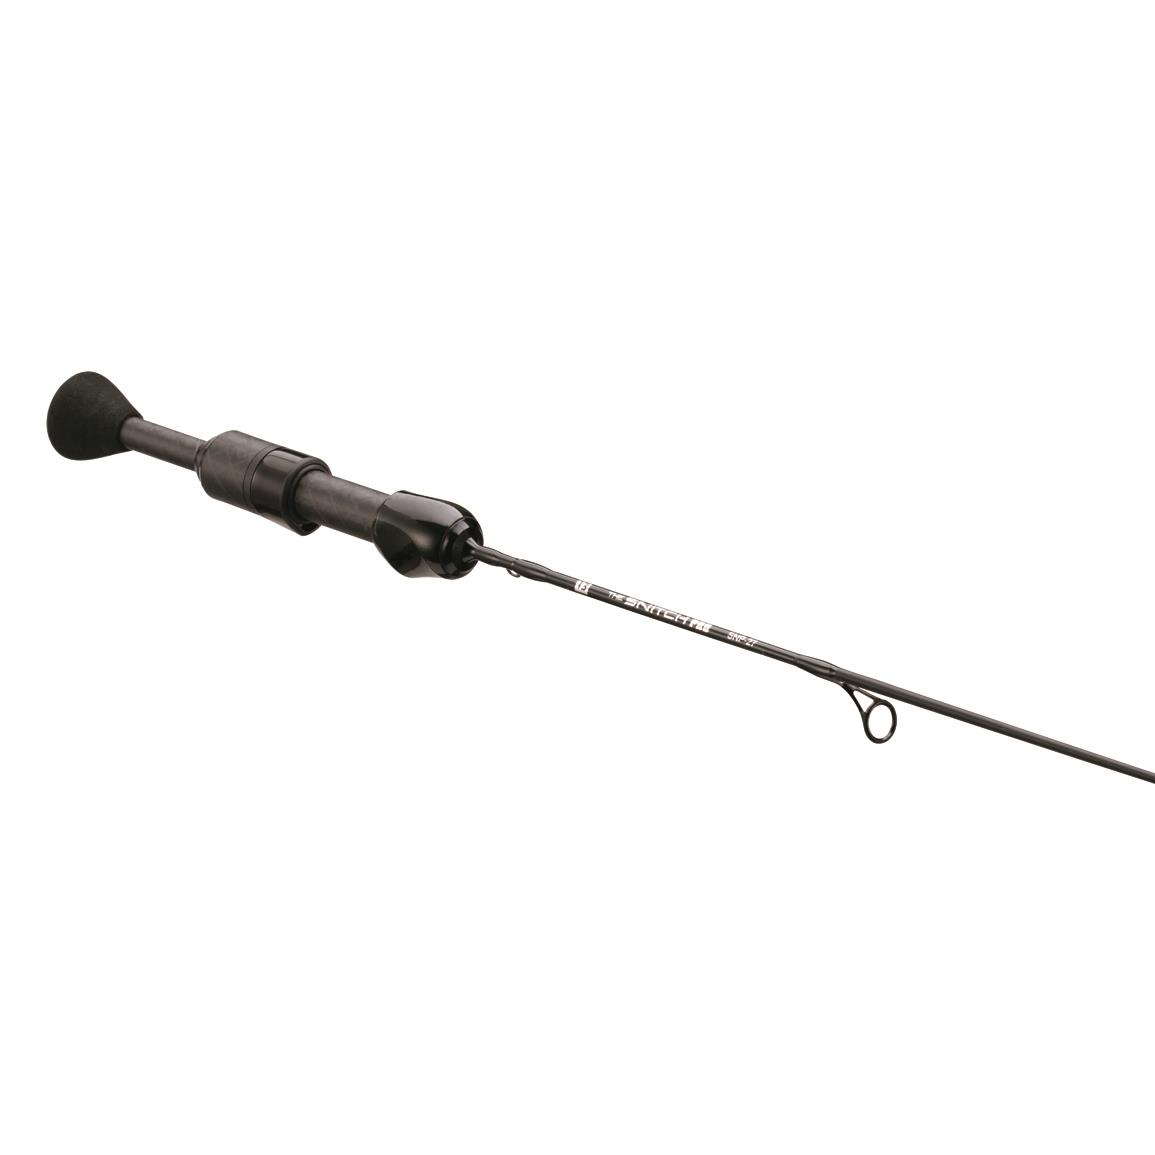 13 Fishing Snitch Pro Ice Fishing Rod, 23" Length, Quick Tip